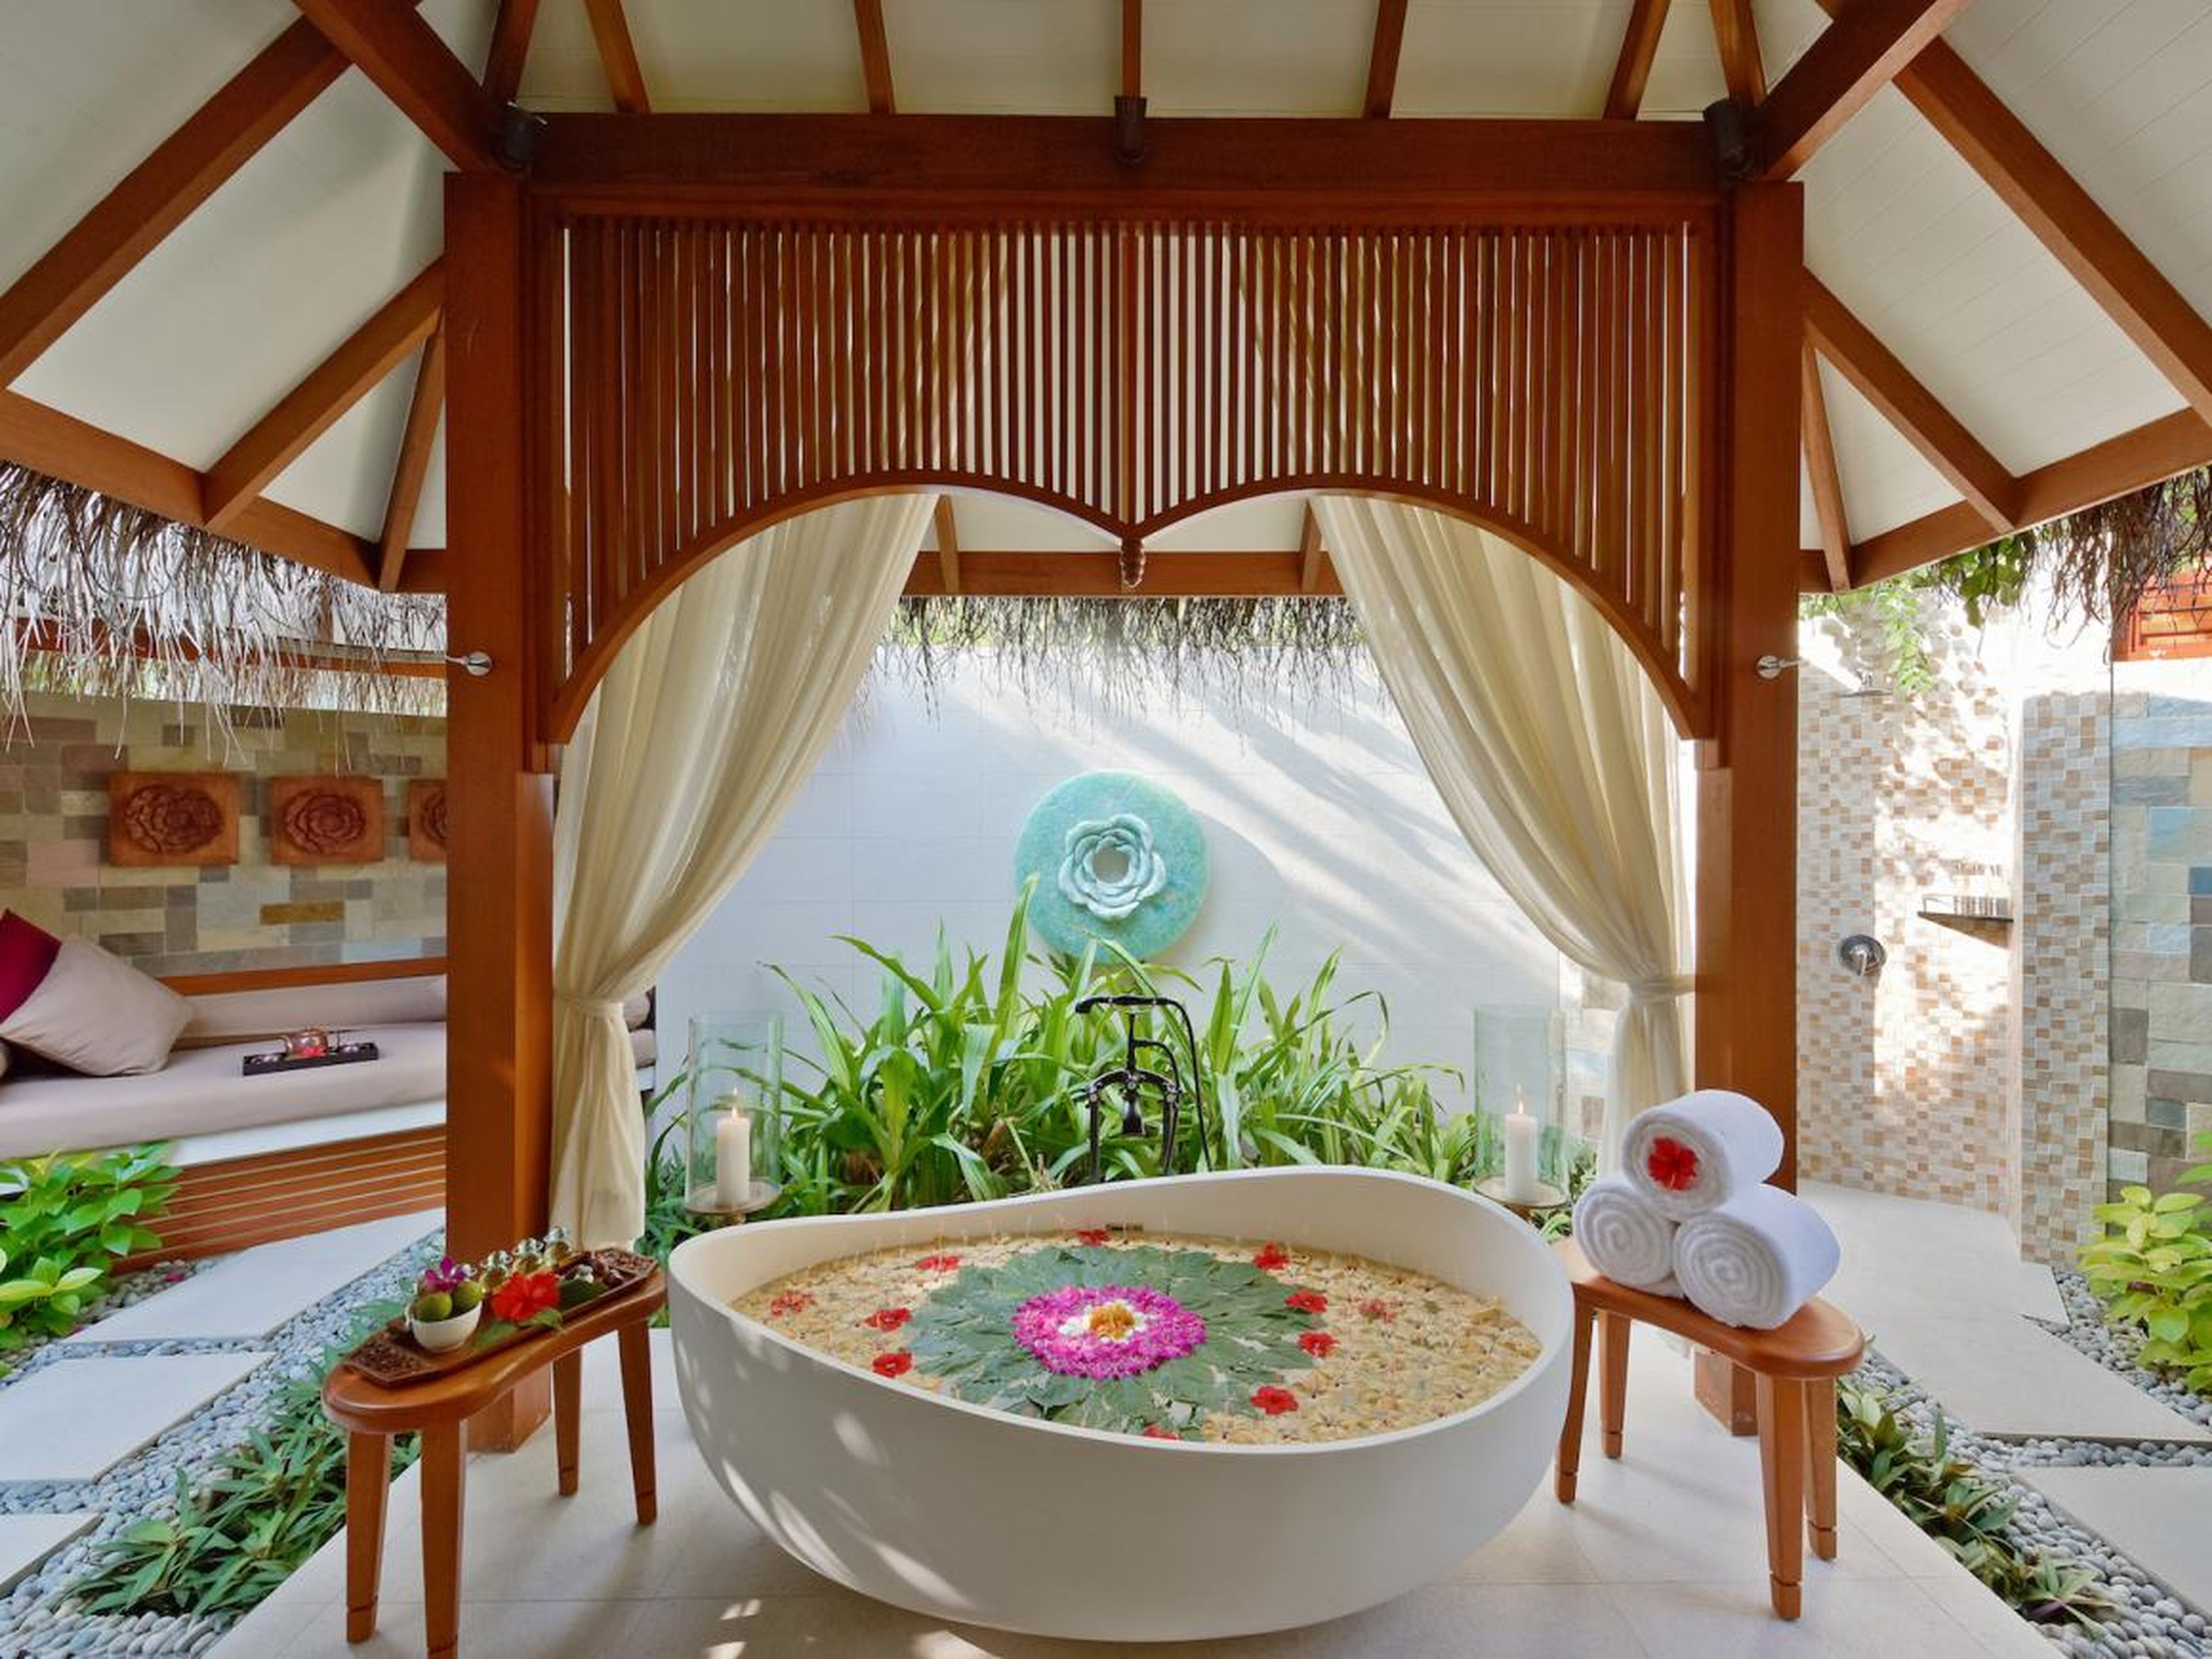 A steam bath and outdoor relaxation area with bathtub and rainfall shower in a tropical garden is included with every suite.